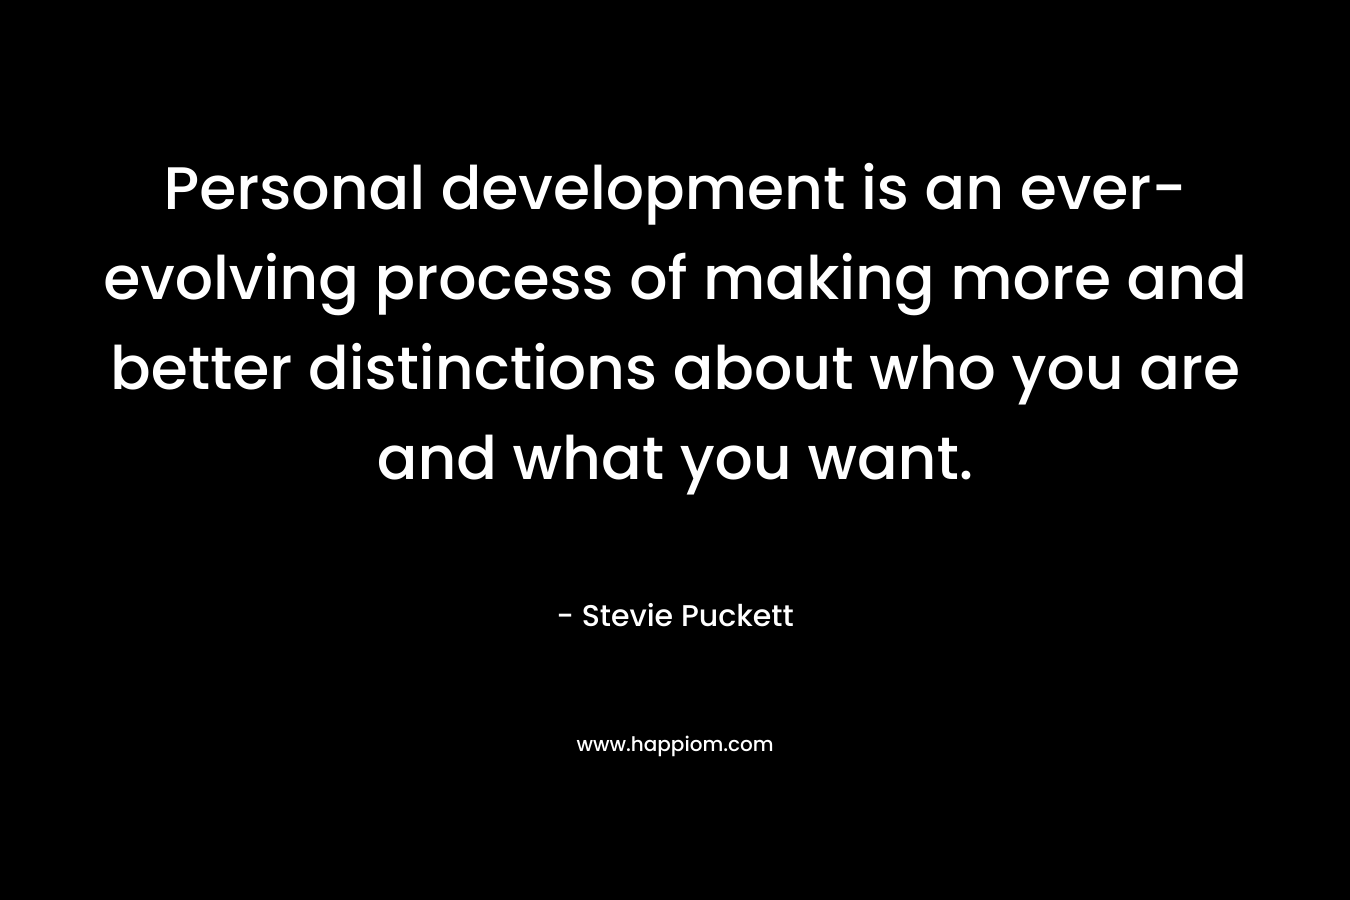 Personal development is an ever-evolving process of making more and better distinctions about who you are and what you want. – Stevie Puckett